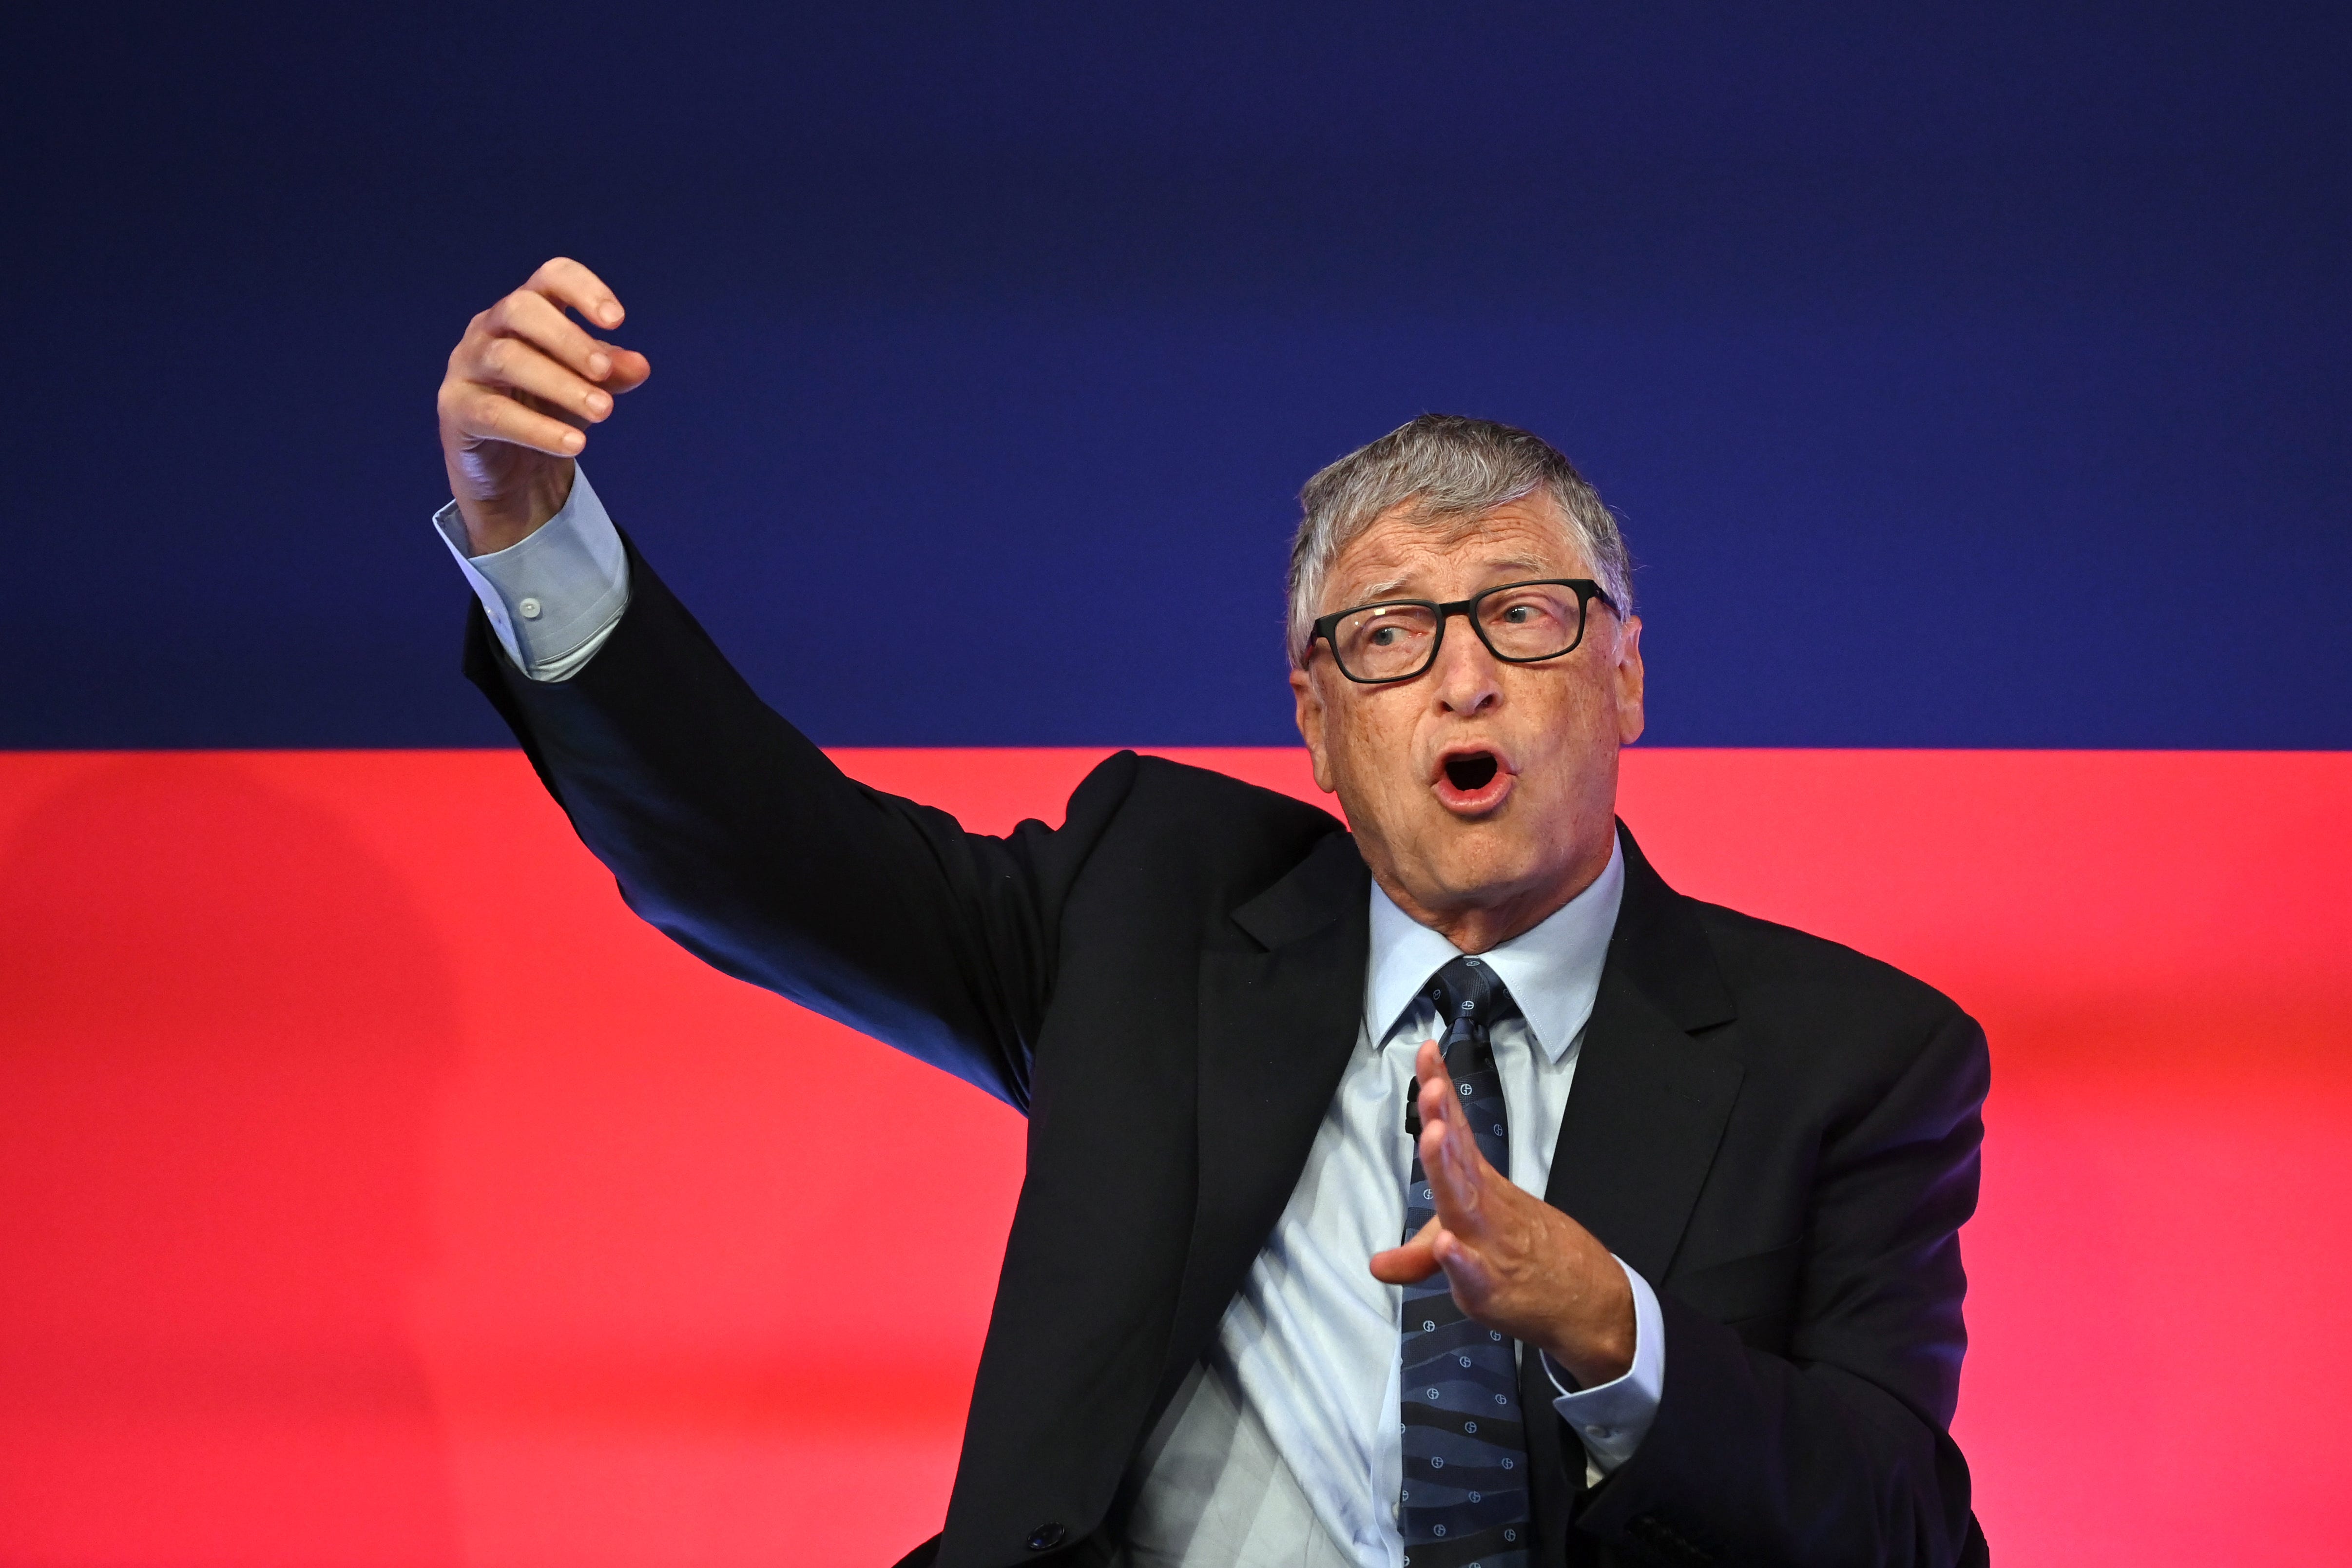 The Truth About Why Bill Gates Keeps Buying Up So Much Farmland